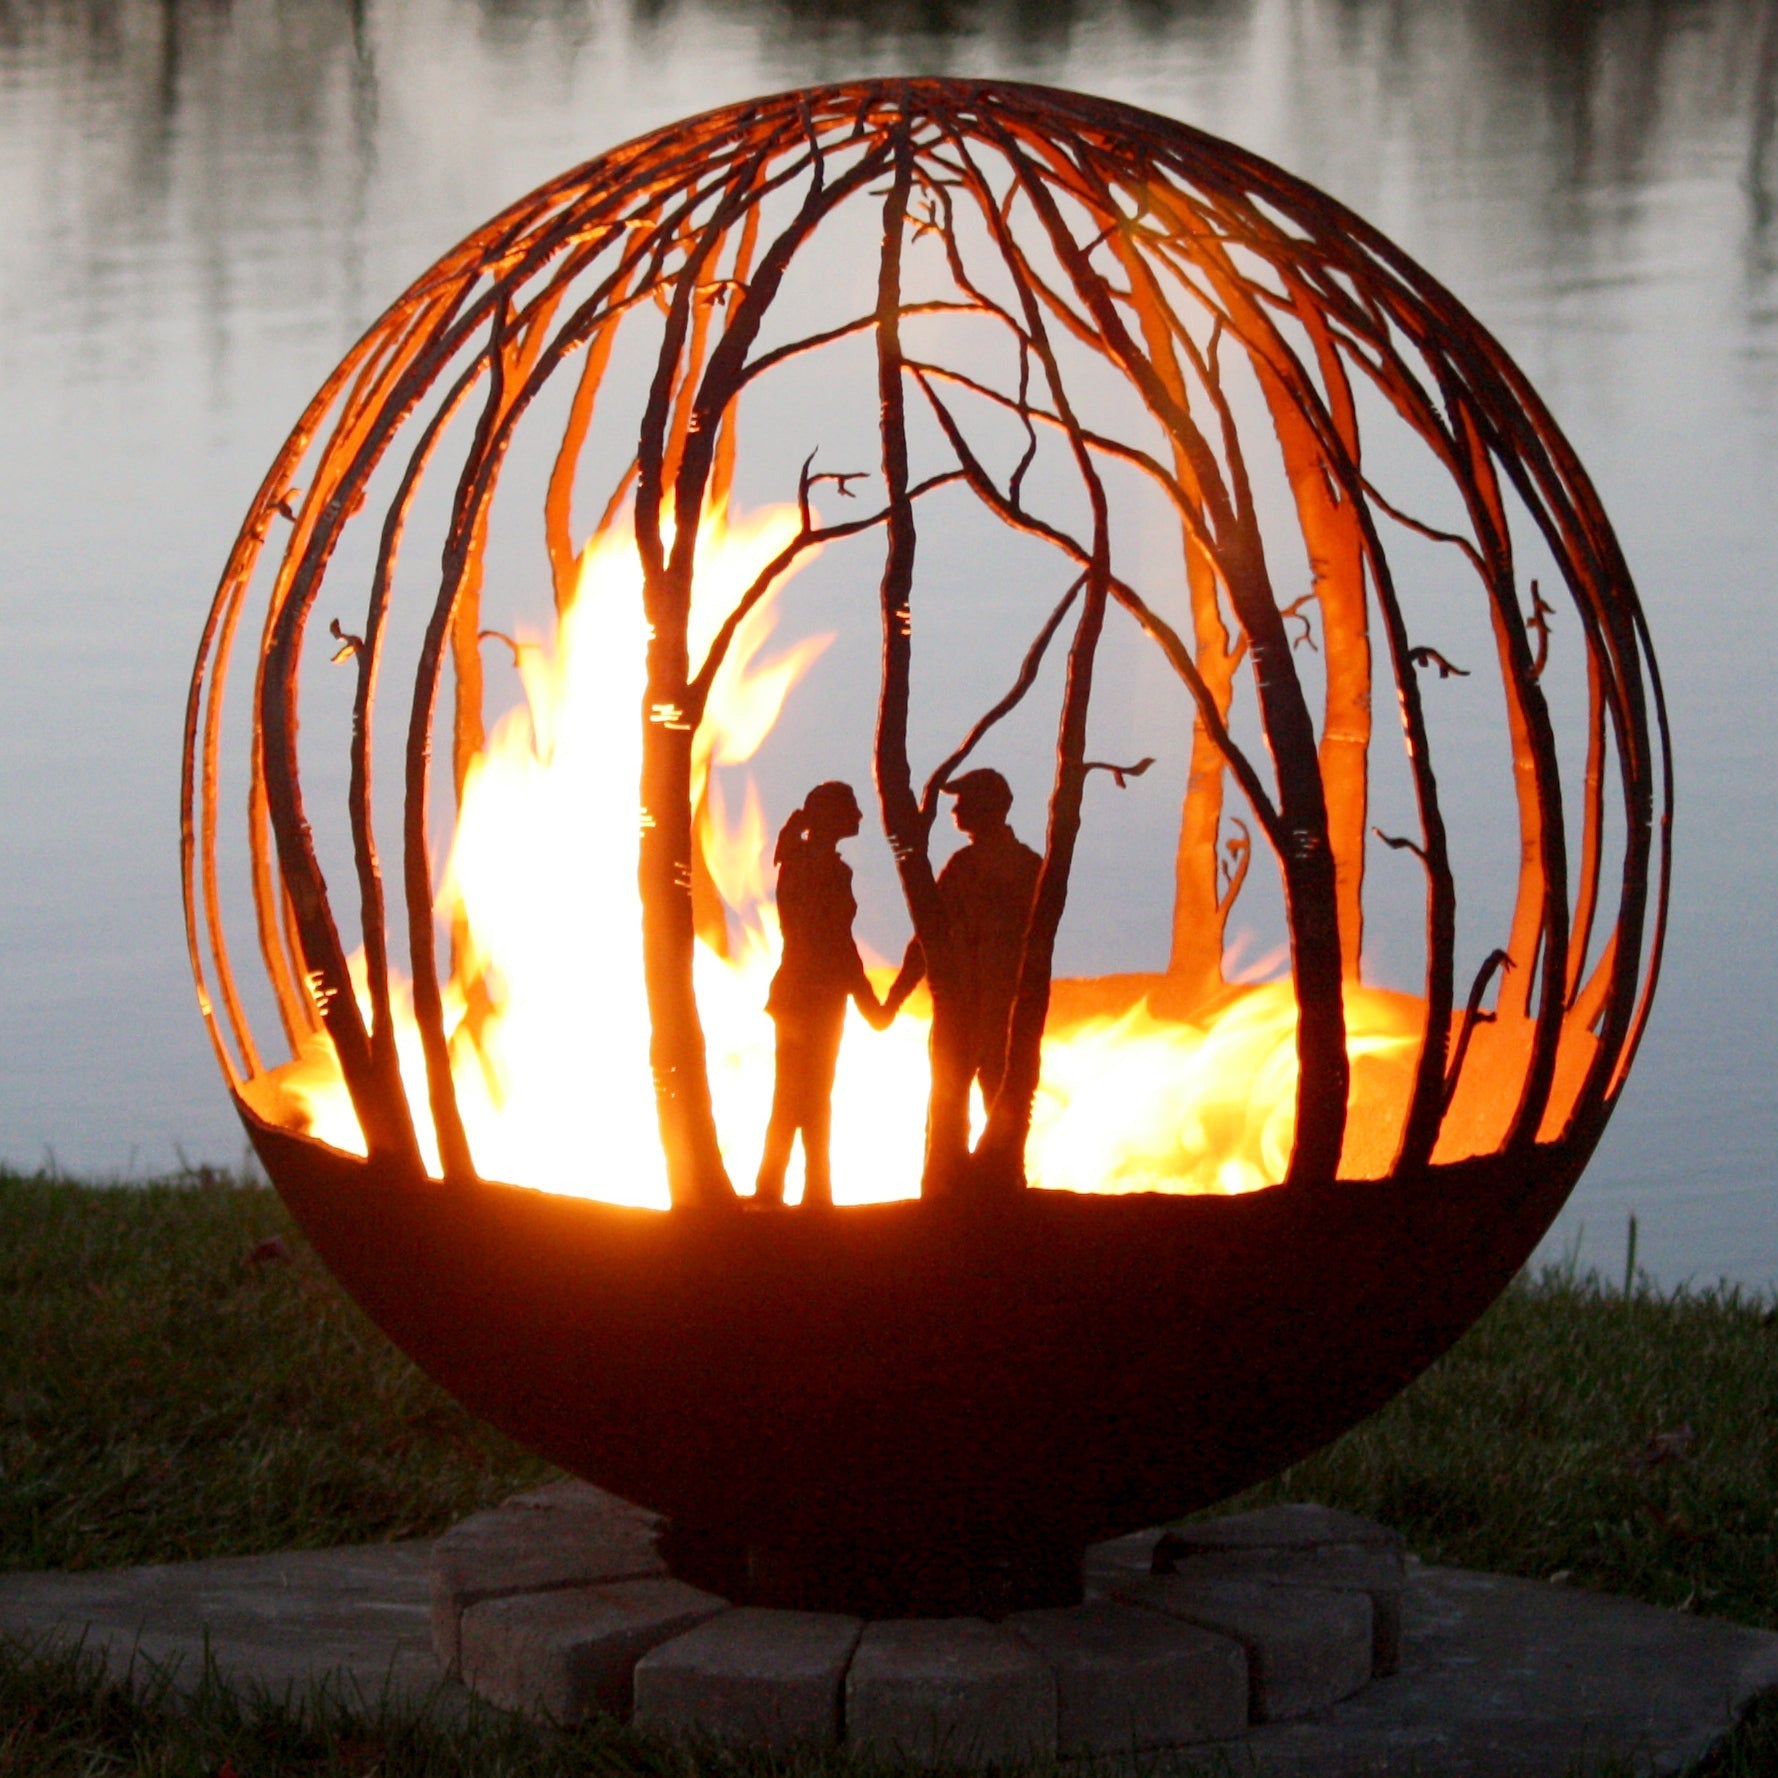 The Fire Pit Gallery Winter Woods Fire Pit Sphere Design Your Own